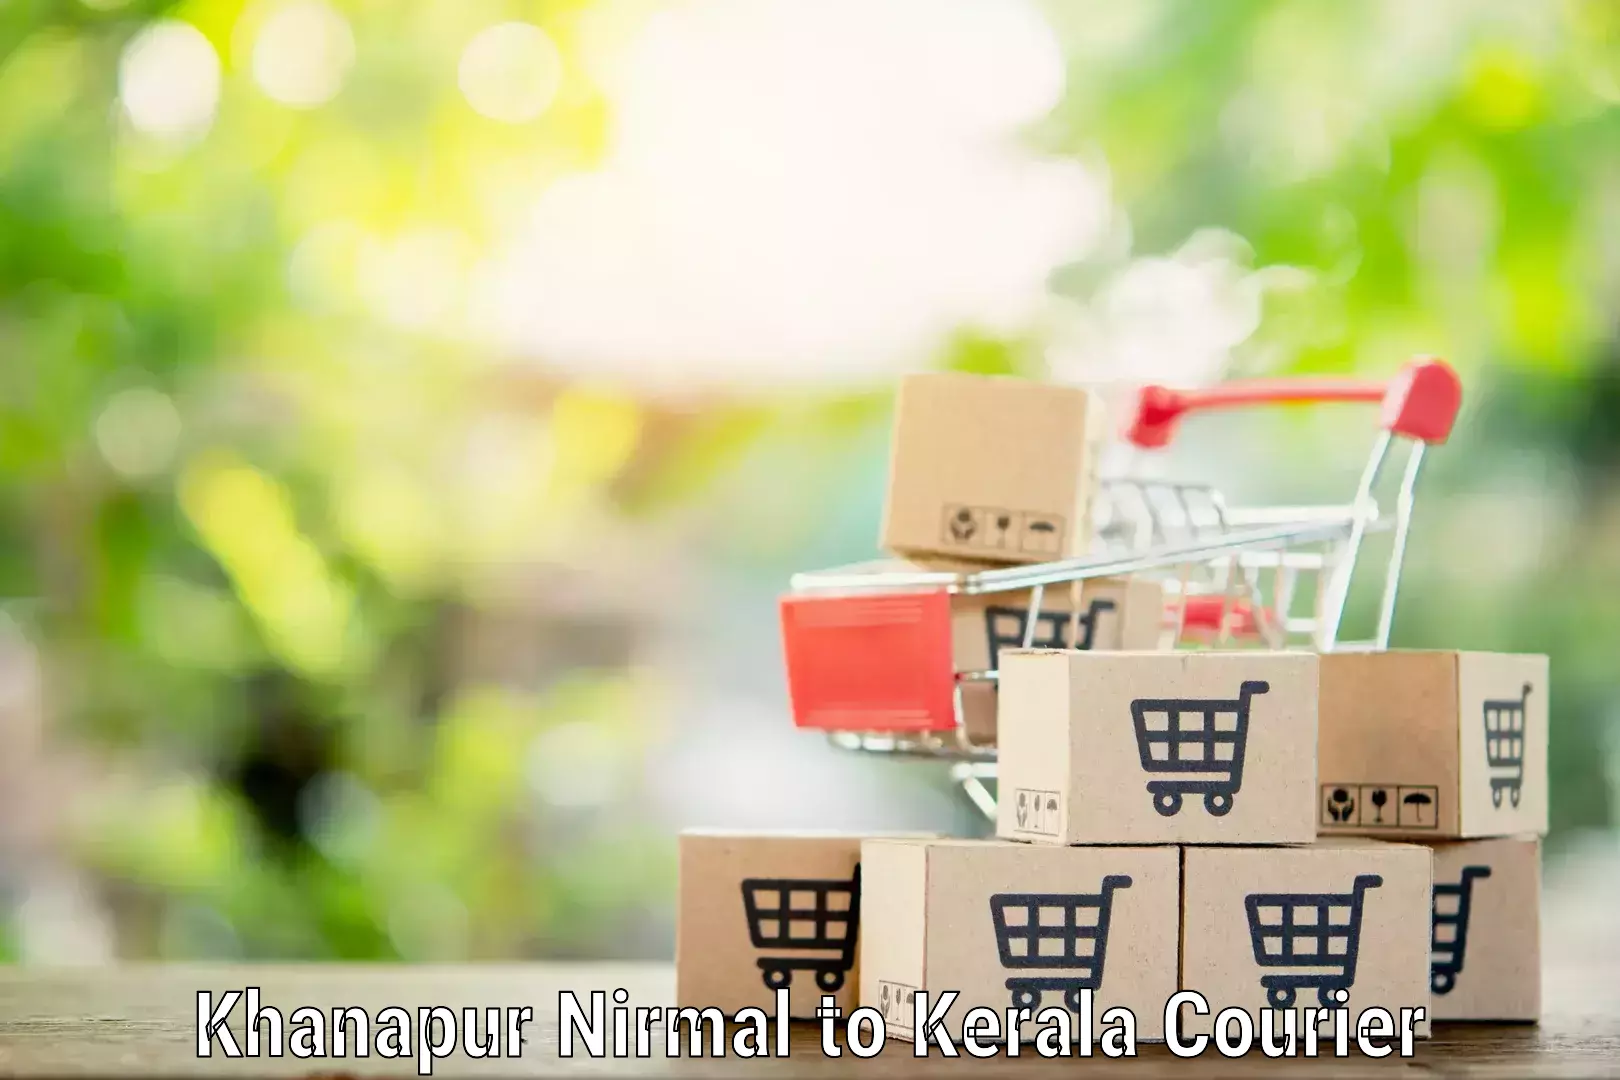 Reliable moving assistance Khanapur Nirmal to Balussery